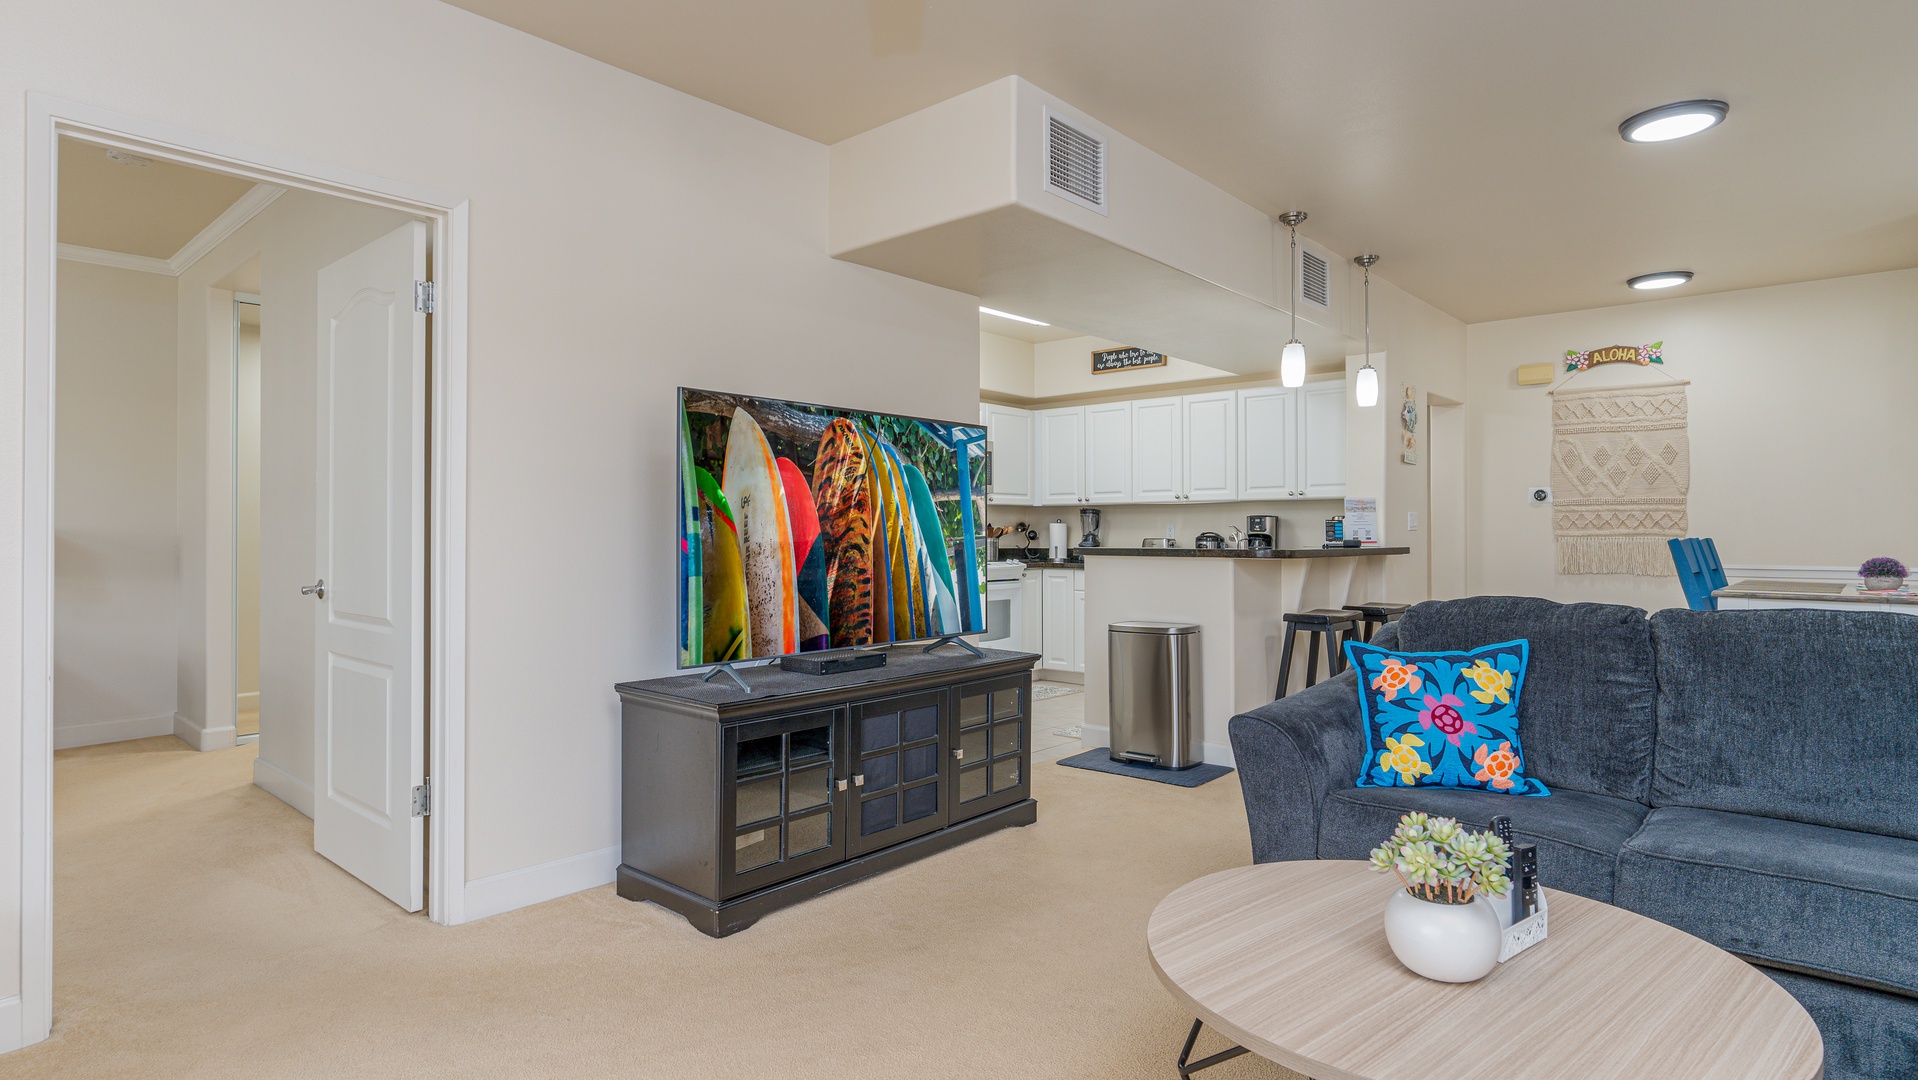 Kapolei Vacation Rentals, Ko Olina Kai 1027A - The open floor plan for the kitchen, living and dining room and the TV with storage.